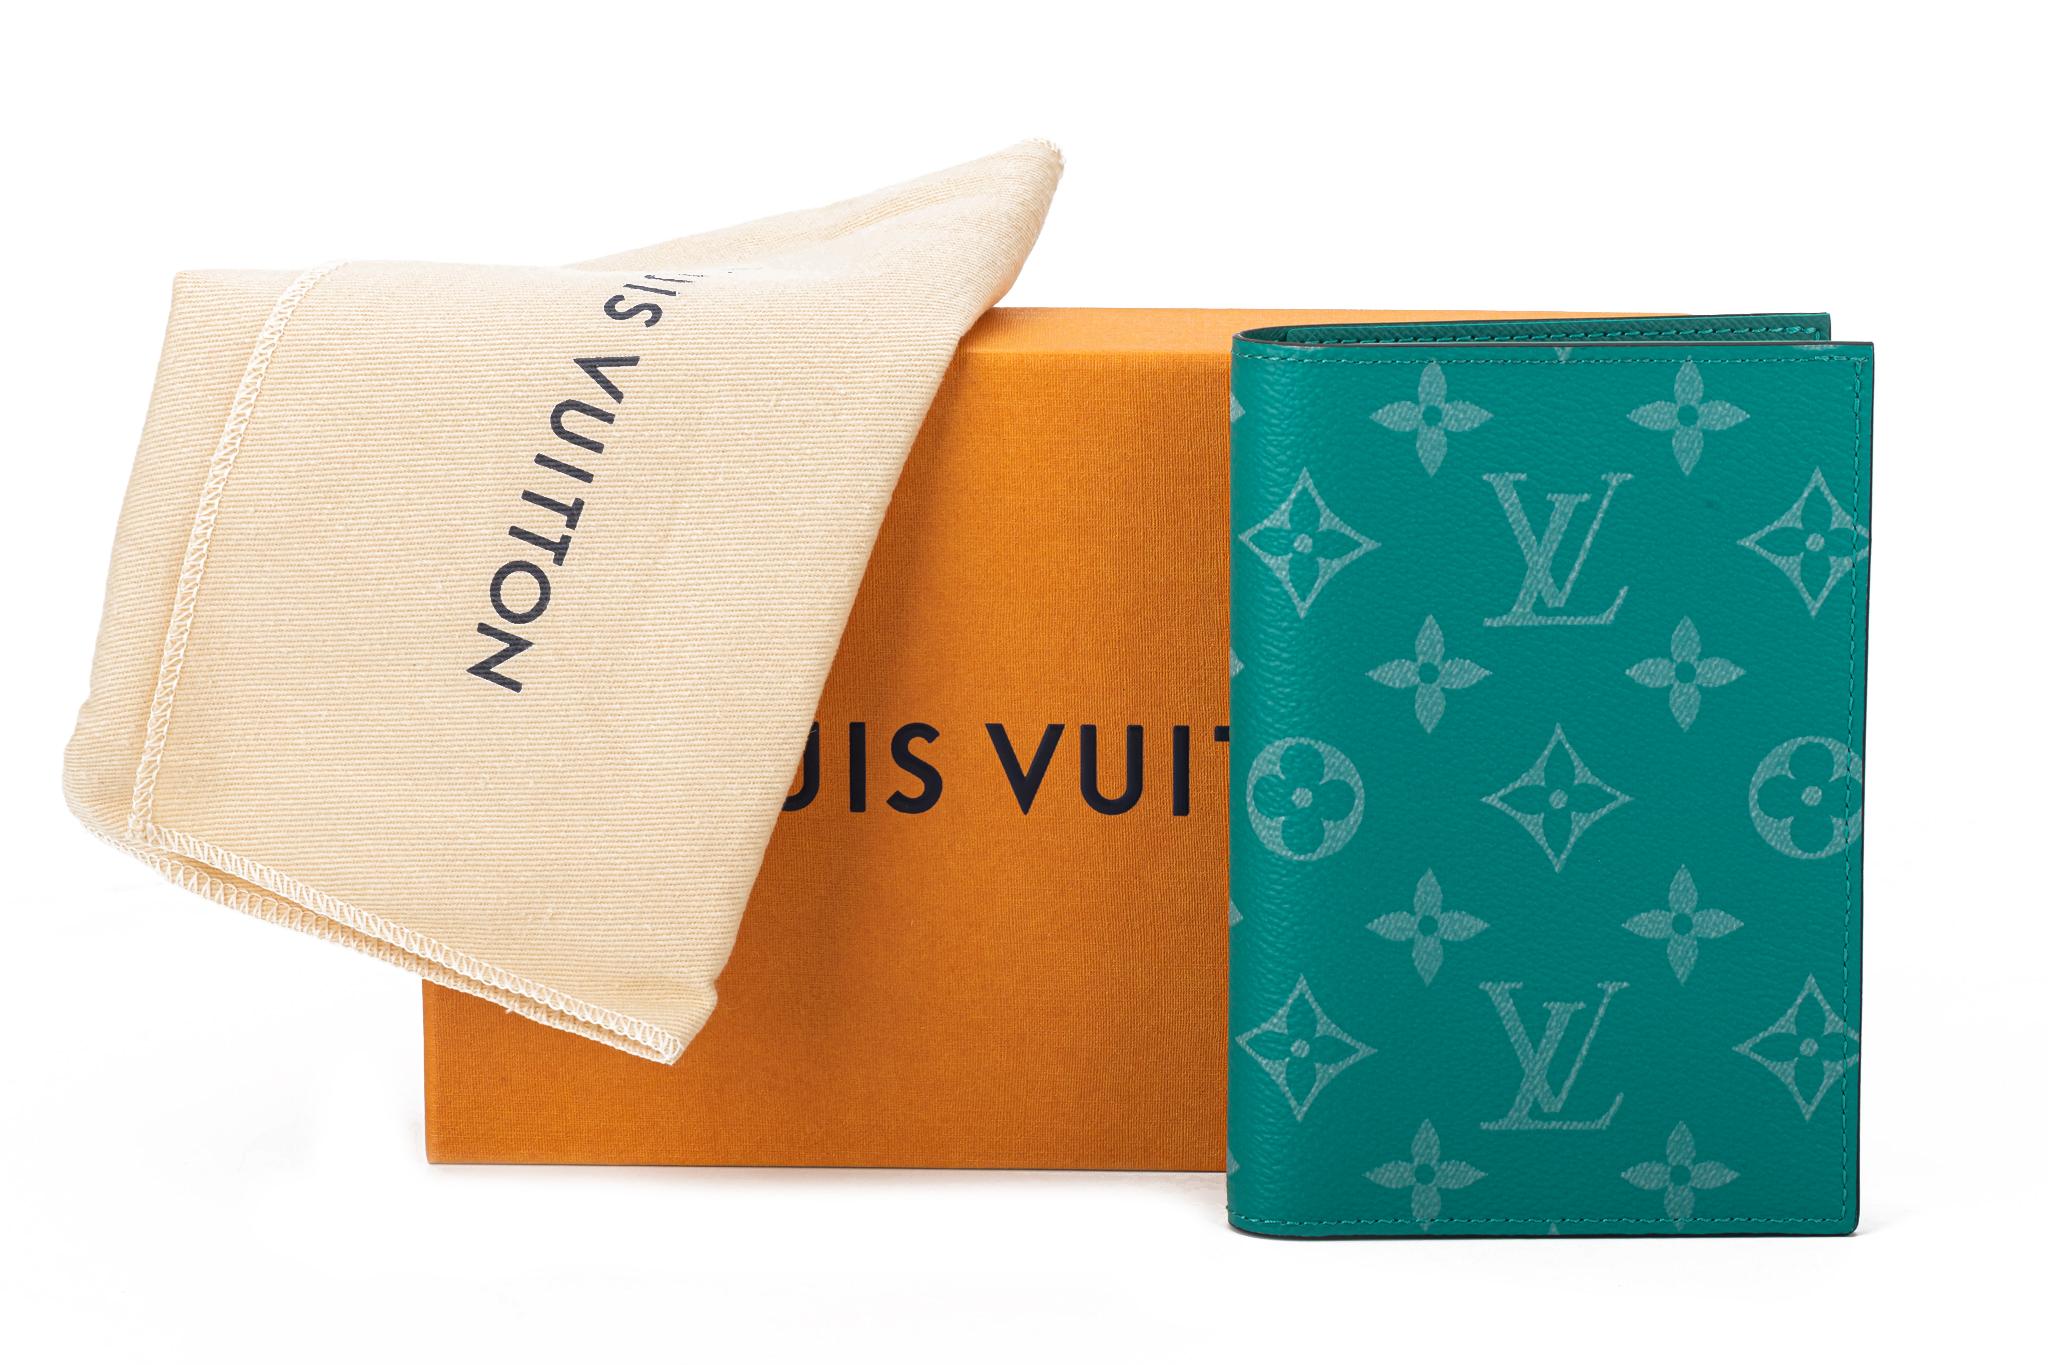 Louis Vuitton Pocket Organizer Monogram Amazon Taiga Pine Green. Pocket organizer comes in a colorful Taiga leather and matching Monogram canvas from the Spring-Summer collection 2019.